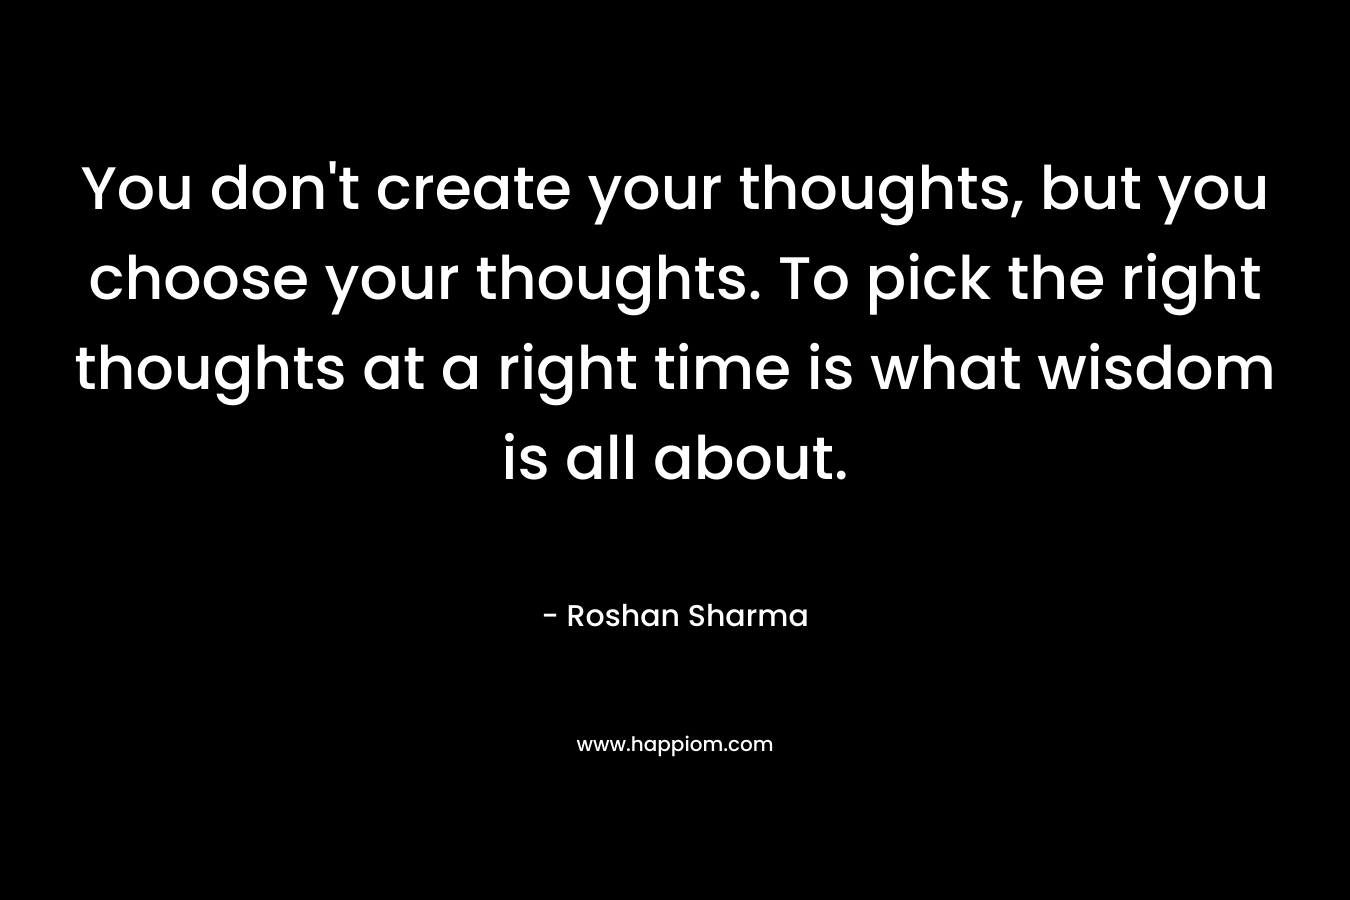 You don’t create your thoughts, but you choose your thoughts. To pick the right thoughts at a right time is what wisdom is all about. – Roshan Sharma